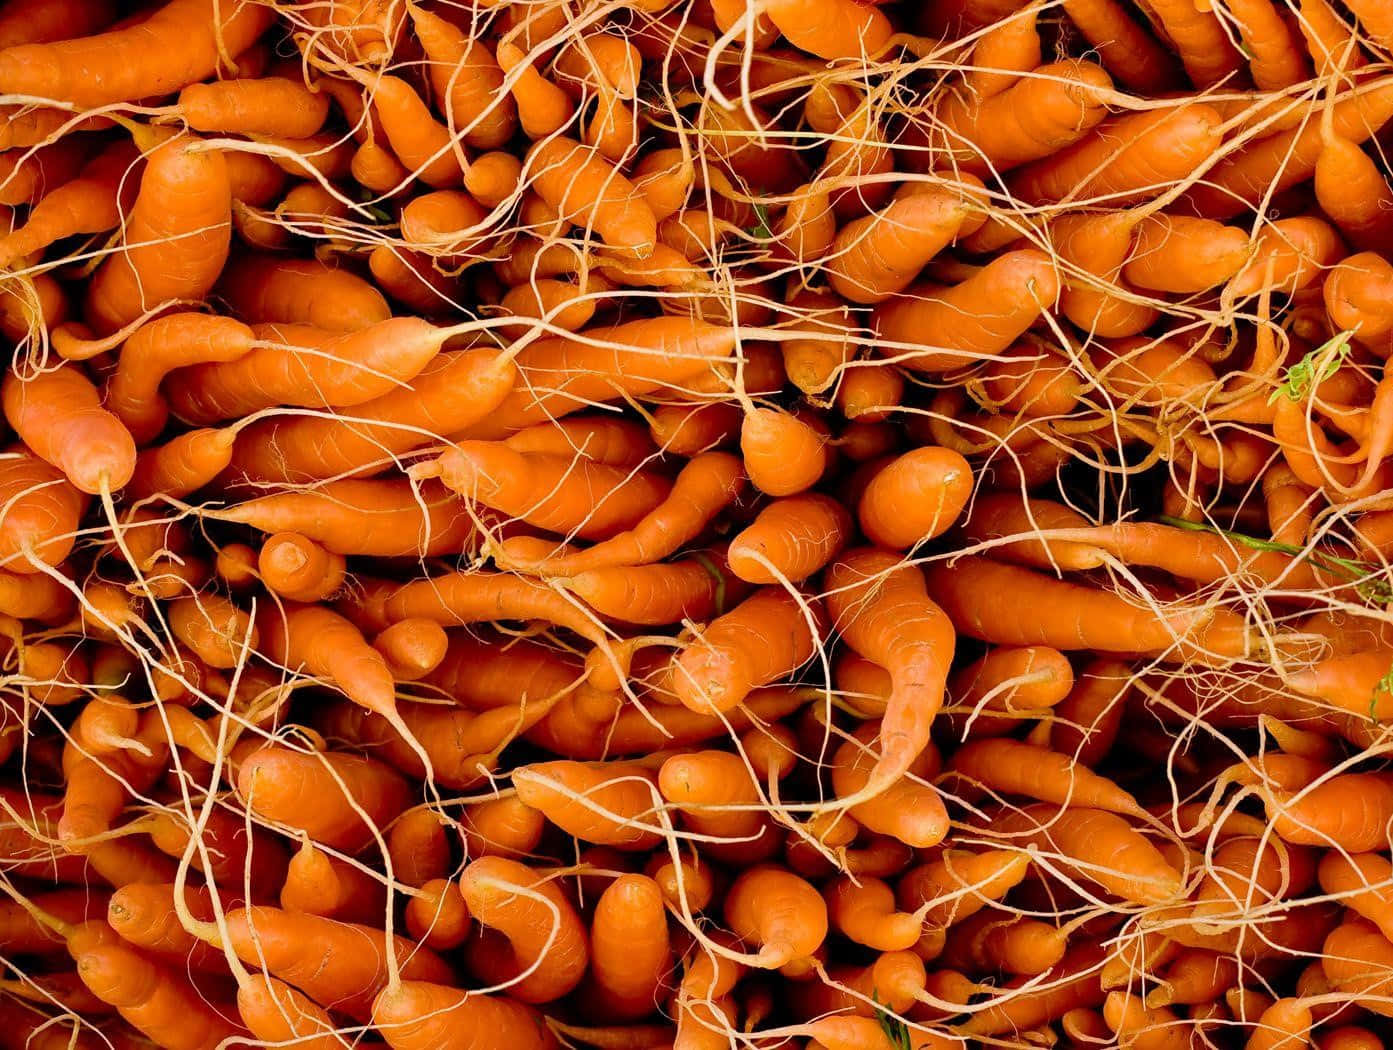 Get your daily dose of Vitamin A with a tasty Carrot!